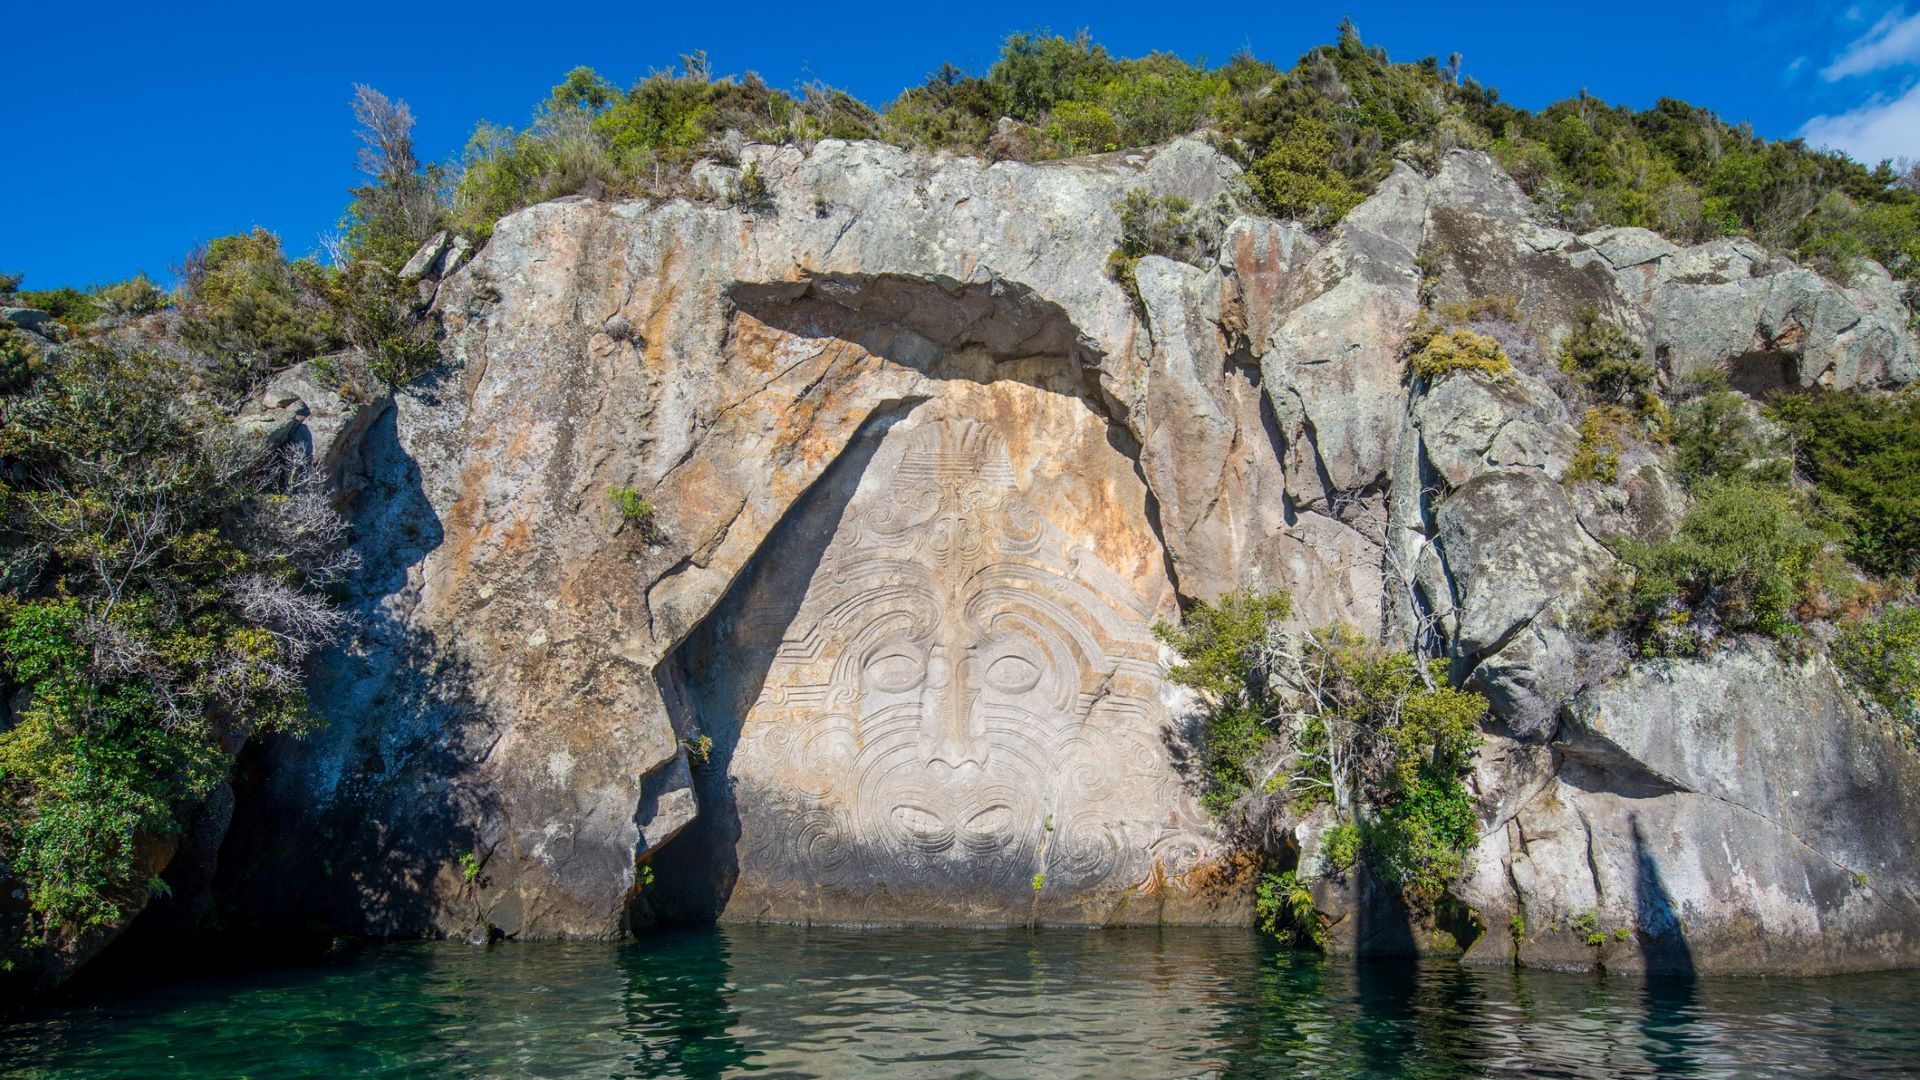 <p>                     Lake Taupō is a great place to go with an active dog, as there are tons of bike trails to keep you busy and dog friendly lakeside spots to take your pal for a walk. Dogs are also allowed in some theme parks. You can also visit historic Māori carvings and experience indigenous New Zealand from the water.                     </p>